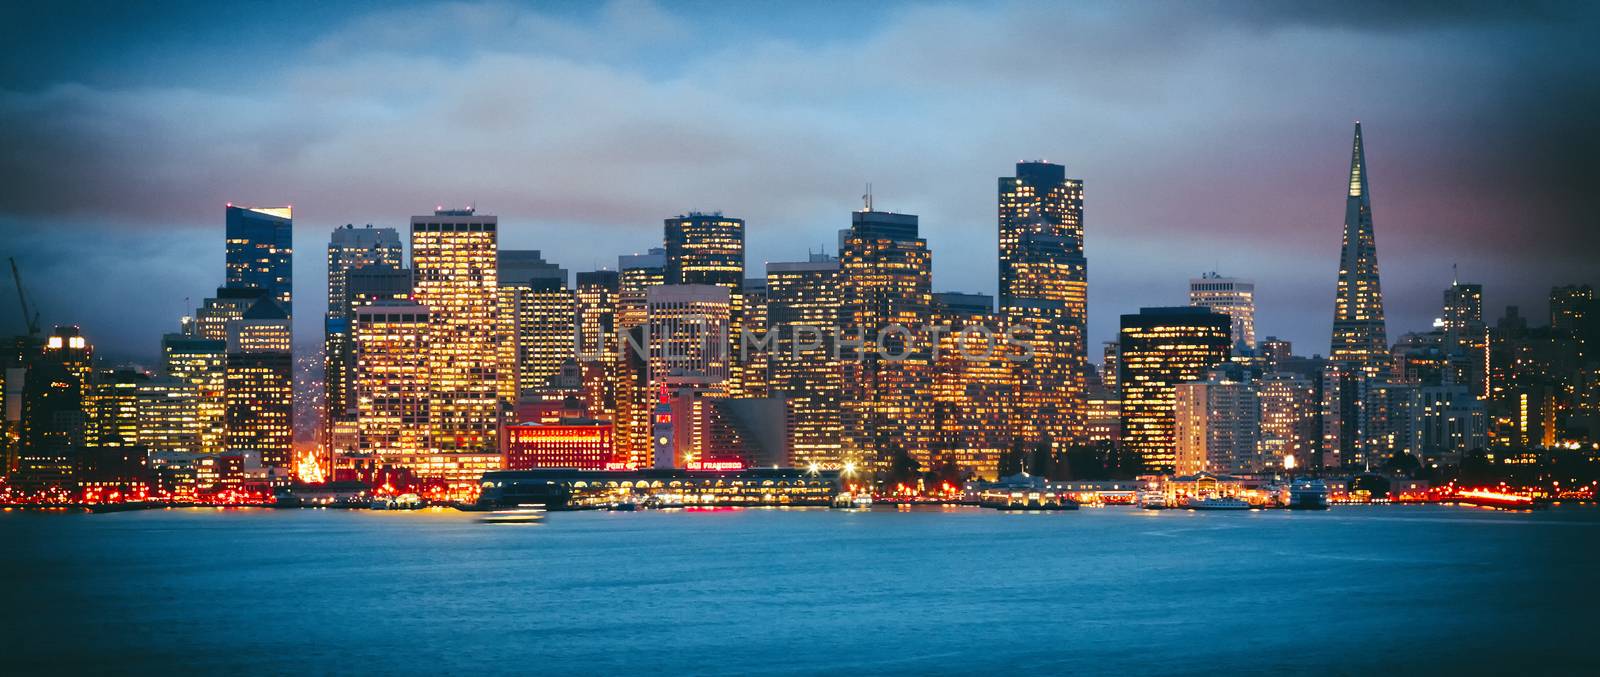 San Francisco Downtown in the night by hanusst